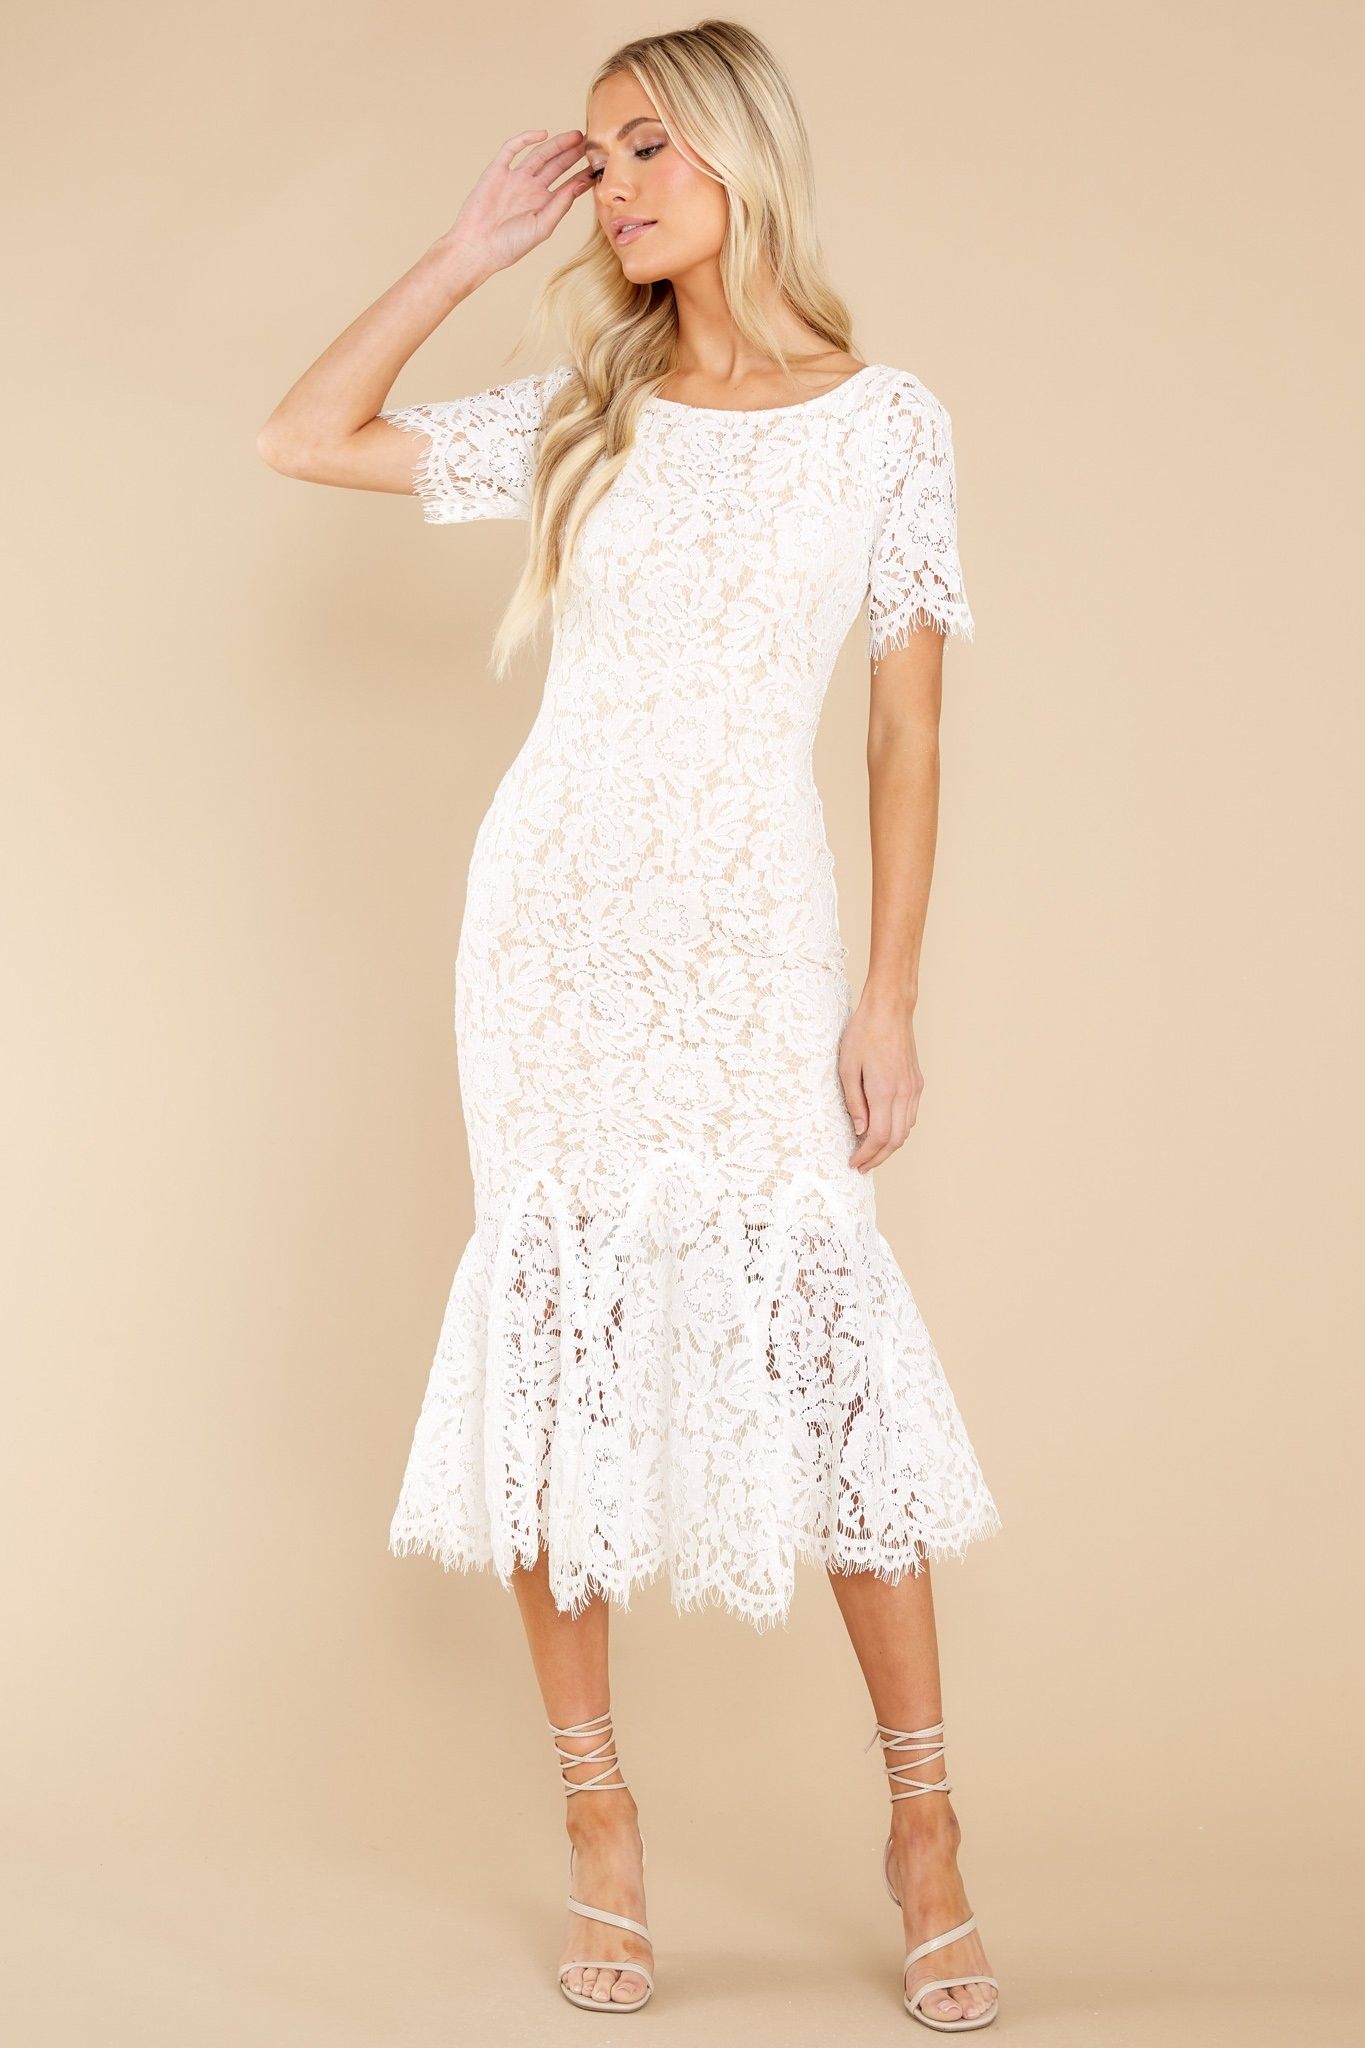 I Can't Resist White Lace Midi Dress, White Lace Dress, Bride, Bride Style, Engagement Party  | Red Dress 